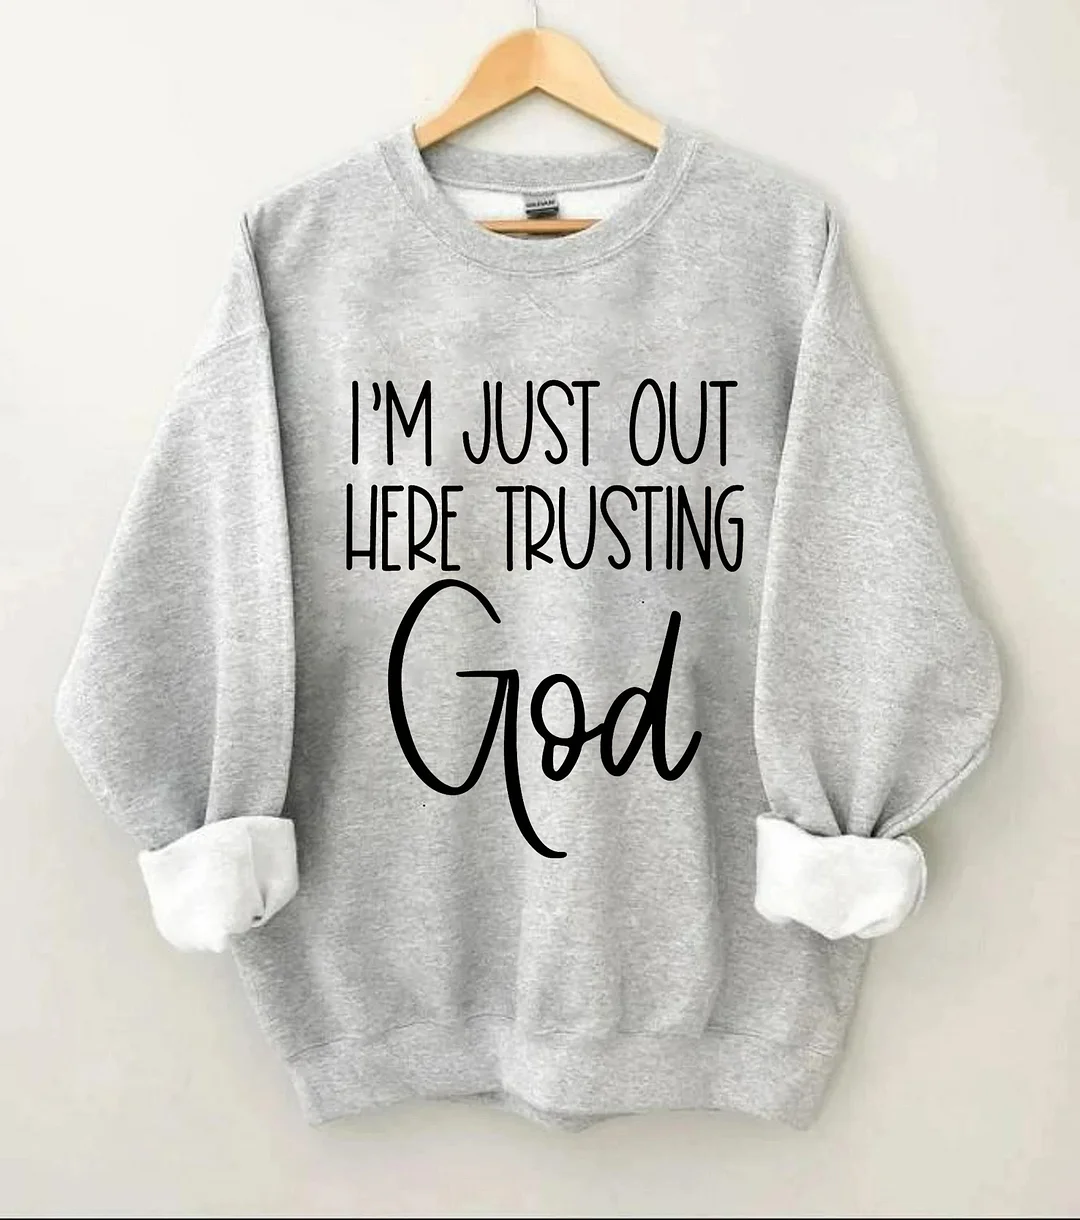 I'm Just Out Here Trusting God Sweatshirt